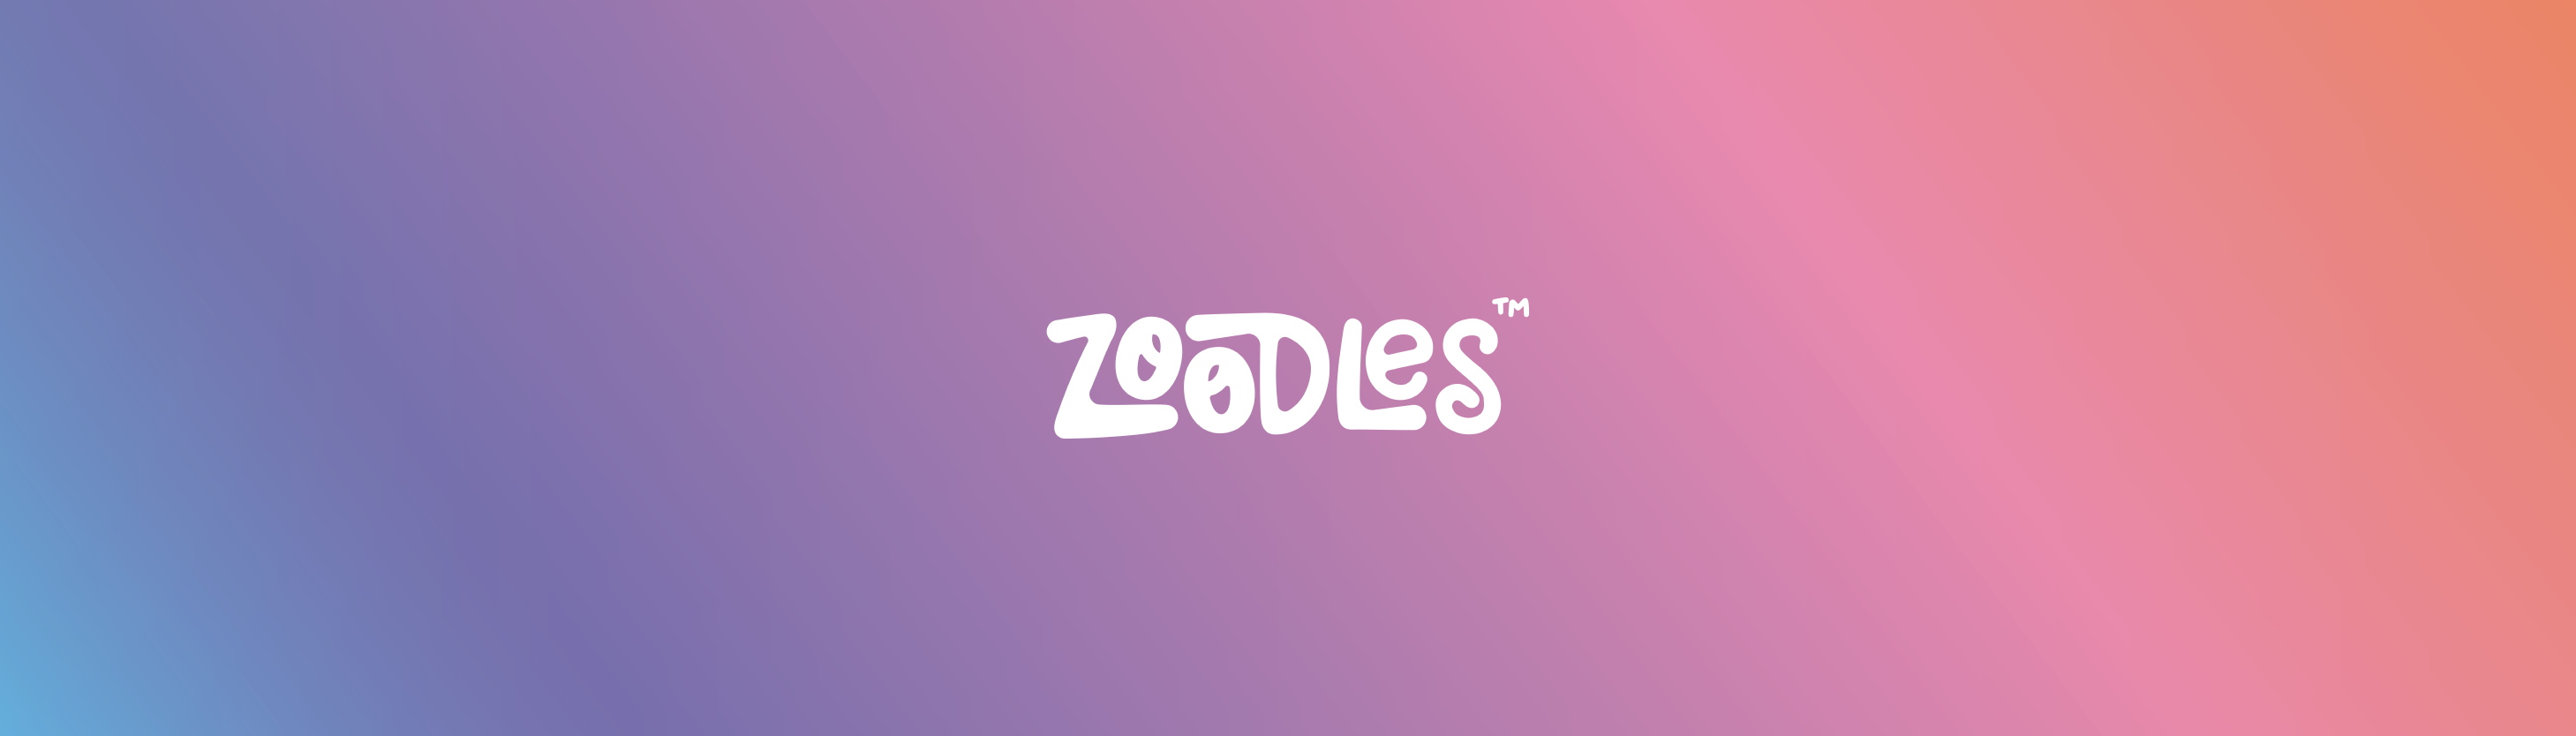 Zoodles_io banner